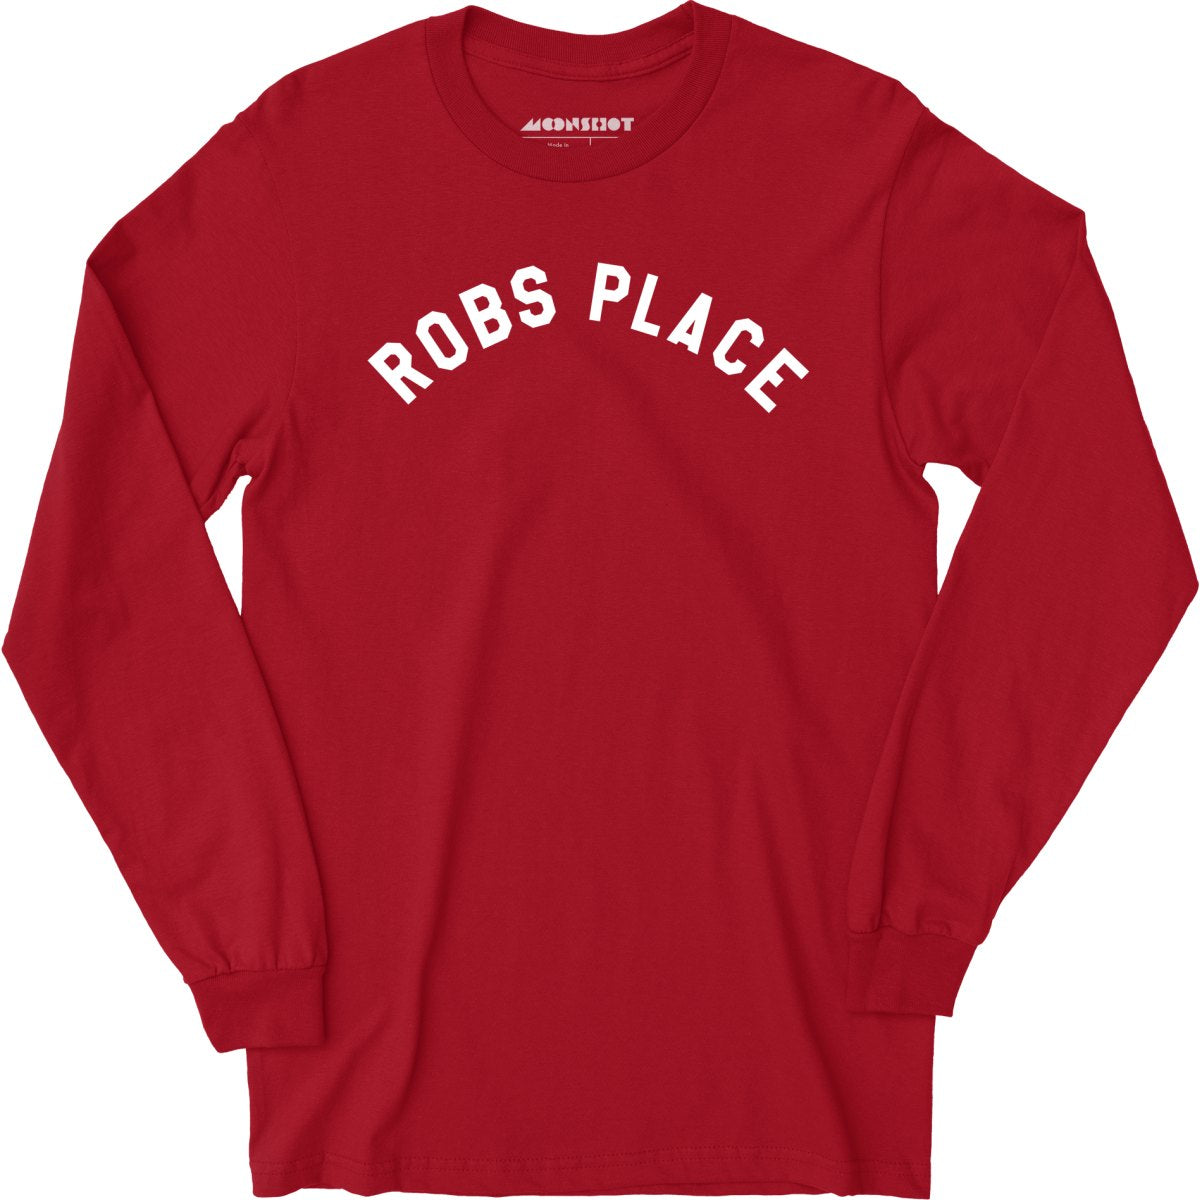 Rob's Place - Long Sleeve T-Shirt